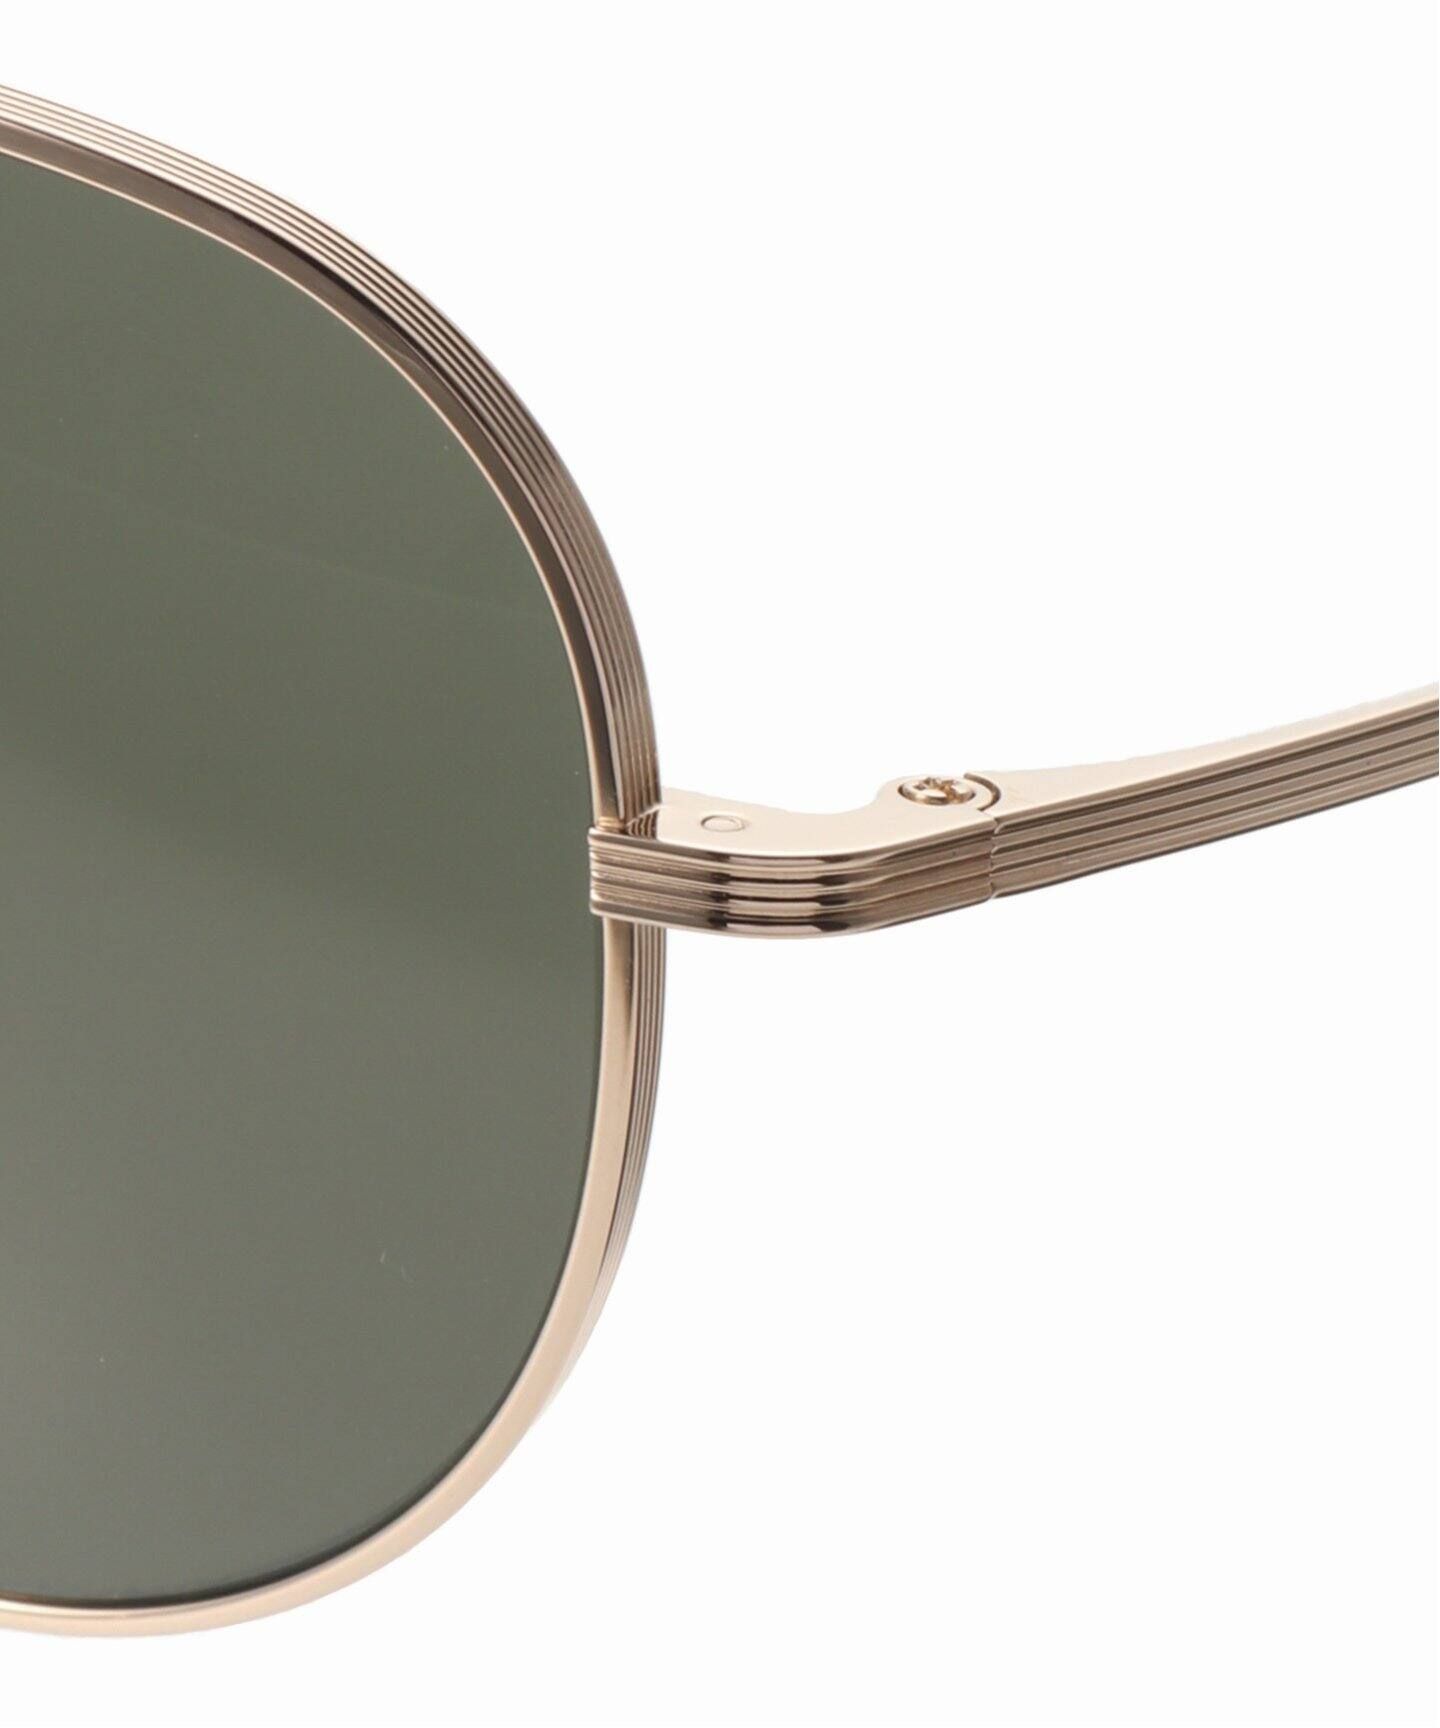  Oliver Peoples x The Row Casse sunglasses. 